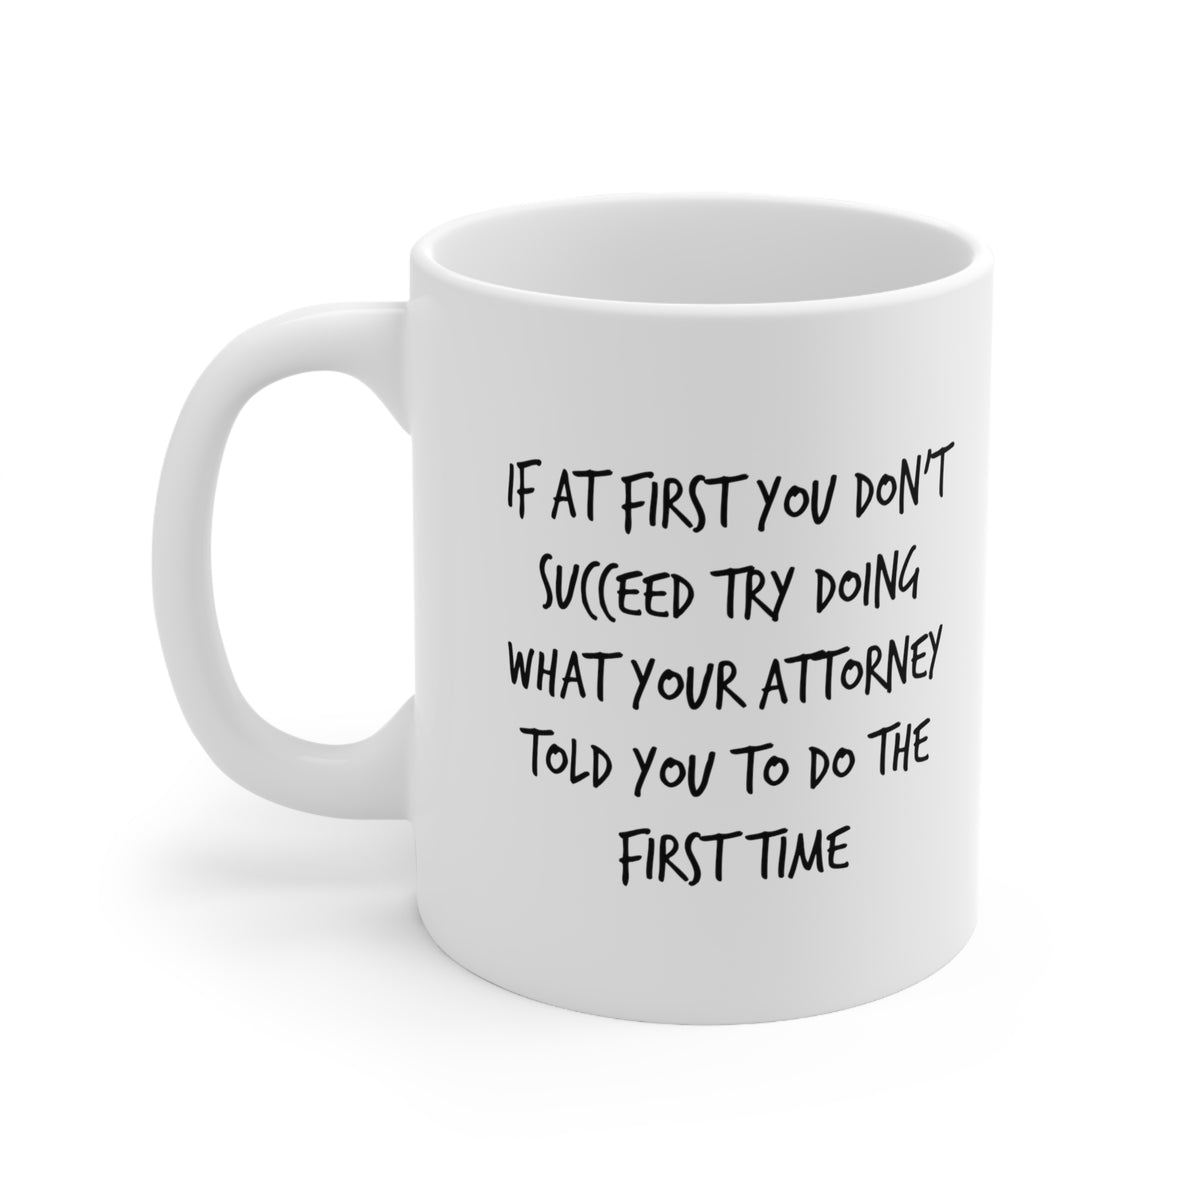 Funny Attorney Coffee Mug - If At First You Don’t Succeed Try Doing What Your Attorney Told You To Do The First Time - Best Lawyer Graduation Christmas Gifts For Women Men